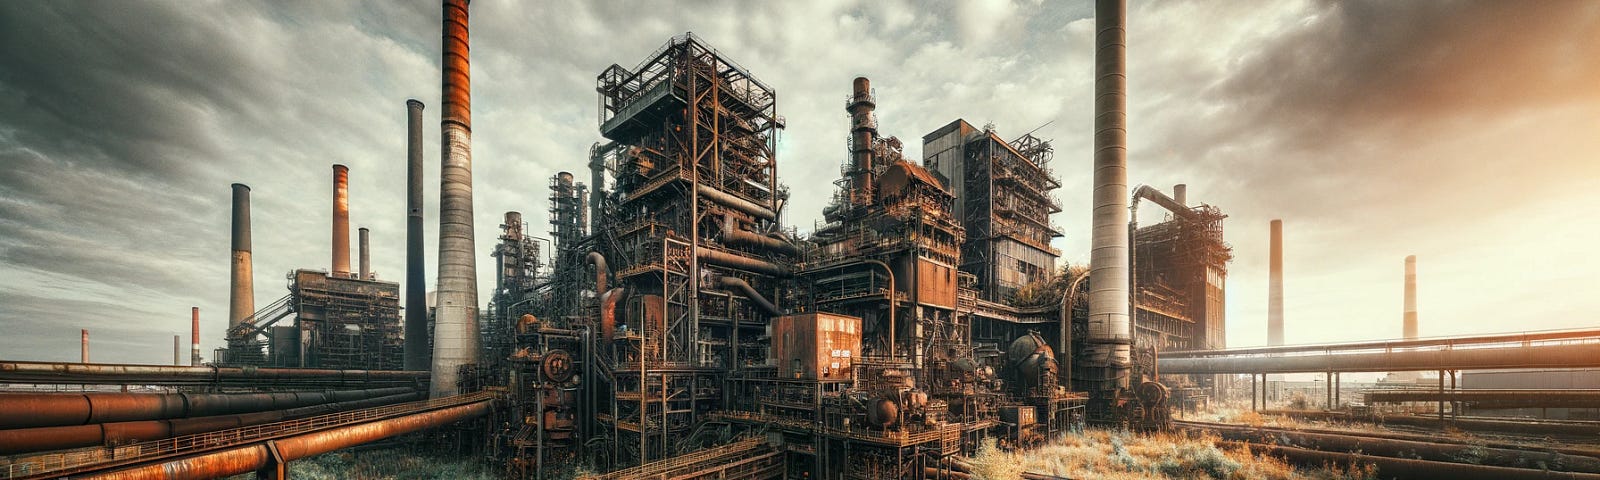 ChatGPT & DALL-E generated panoramic image of a non-operational and rusting coal plant, overtaken by nature. The illustration captures the essence of decay and abandonment, with nature slowly reclaiming the industrial site.